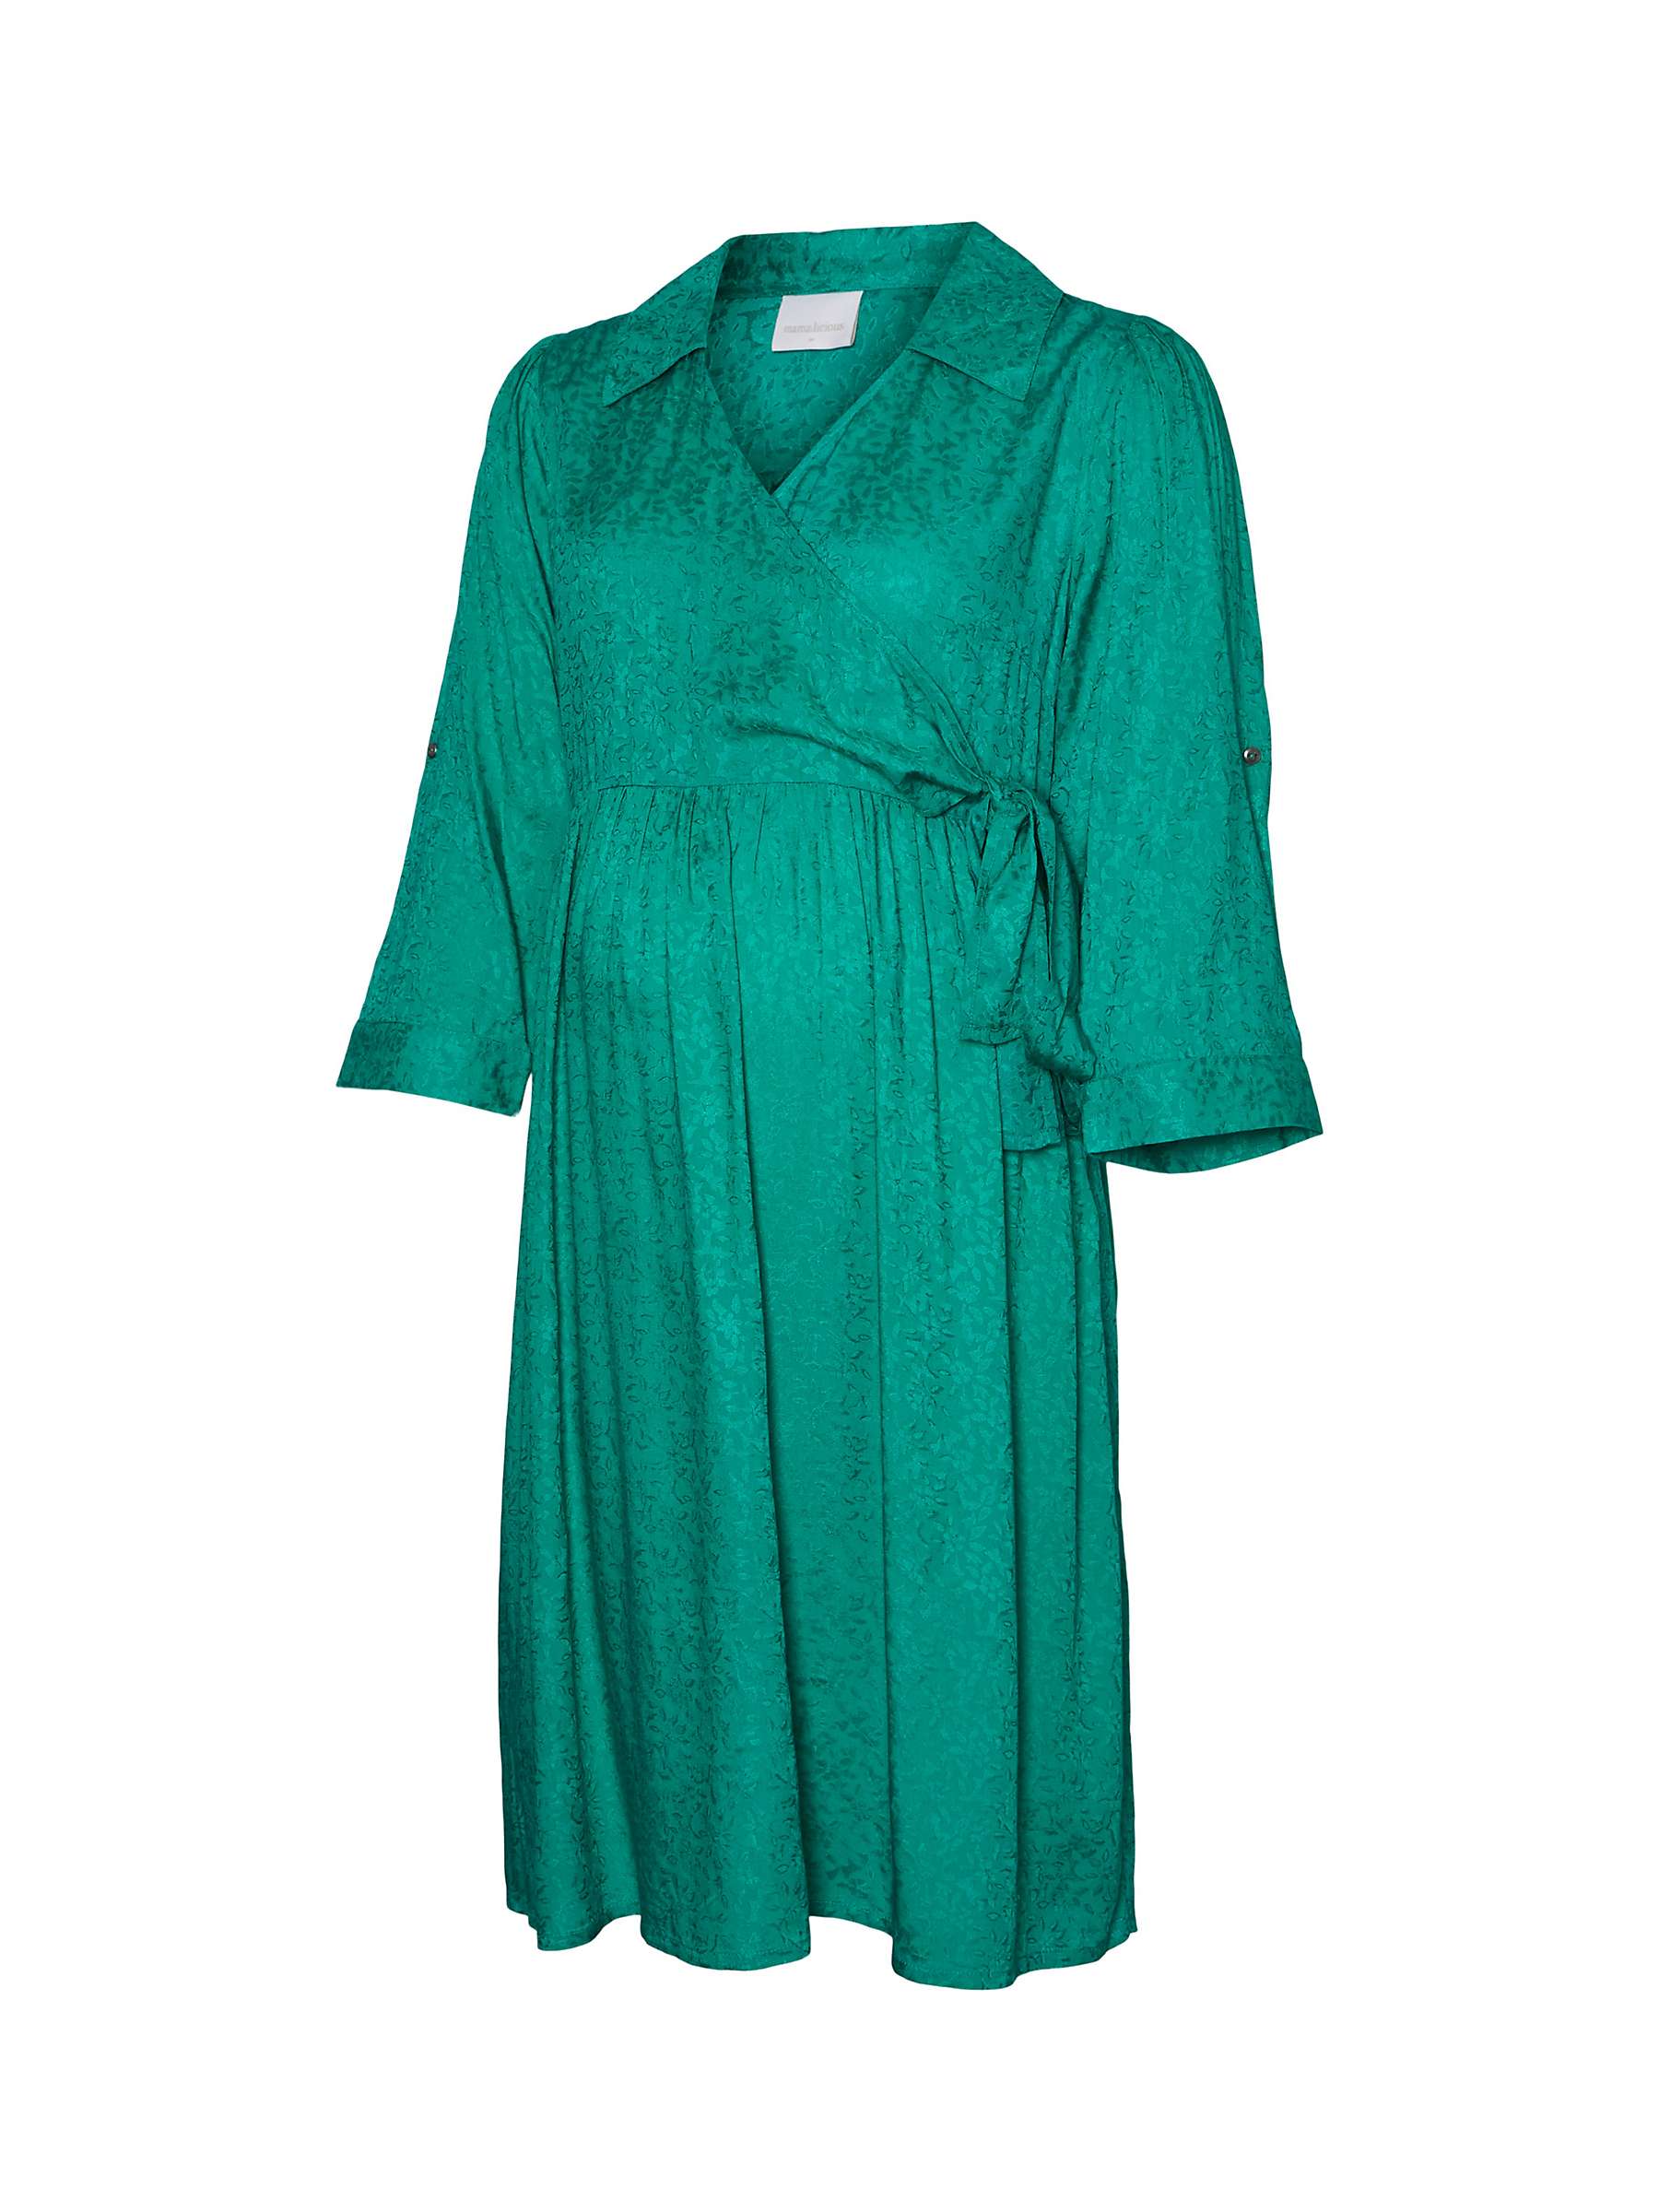 Buy Mamalicious Elodie Wrap Maternity Dress, Alhambra Online at johnlewis.com